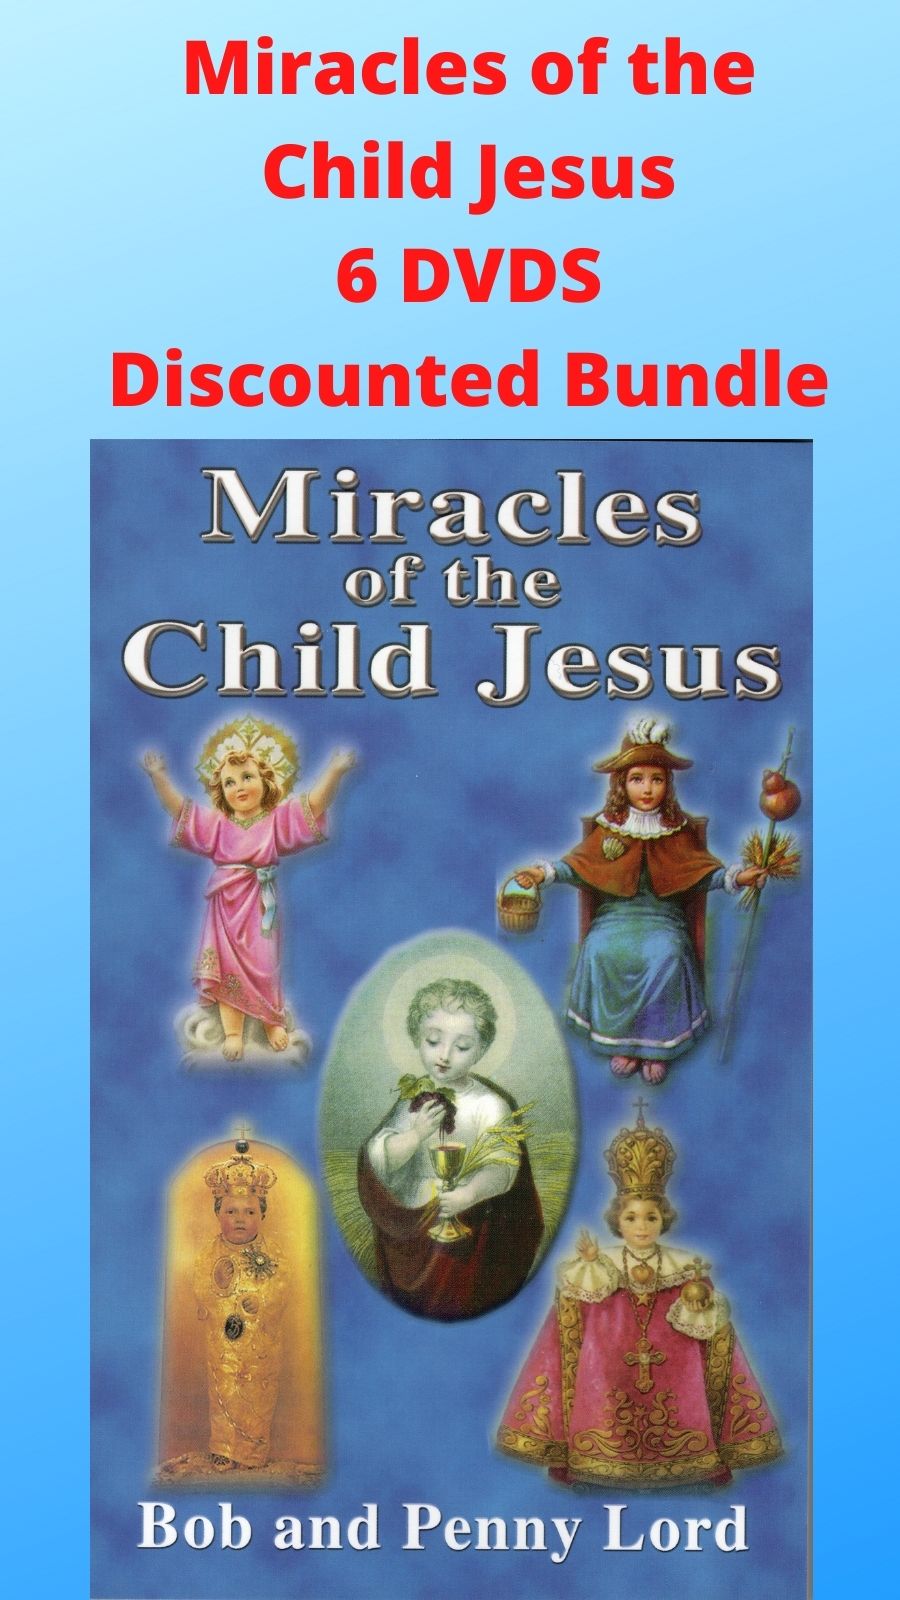 Miracles of the Child Jesus 6 DVDS Discounted Bundle - Bob and Penny Lord